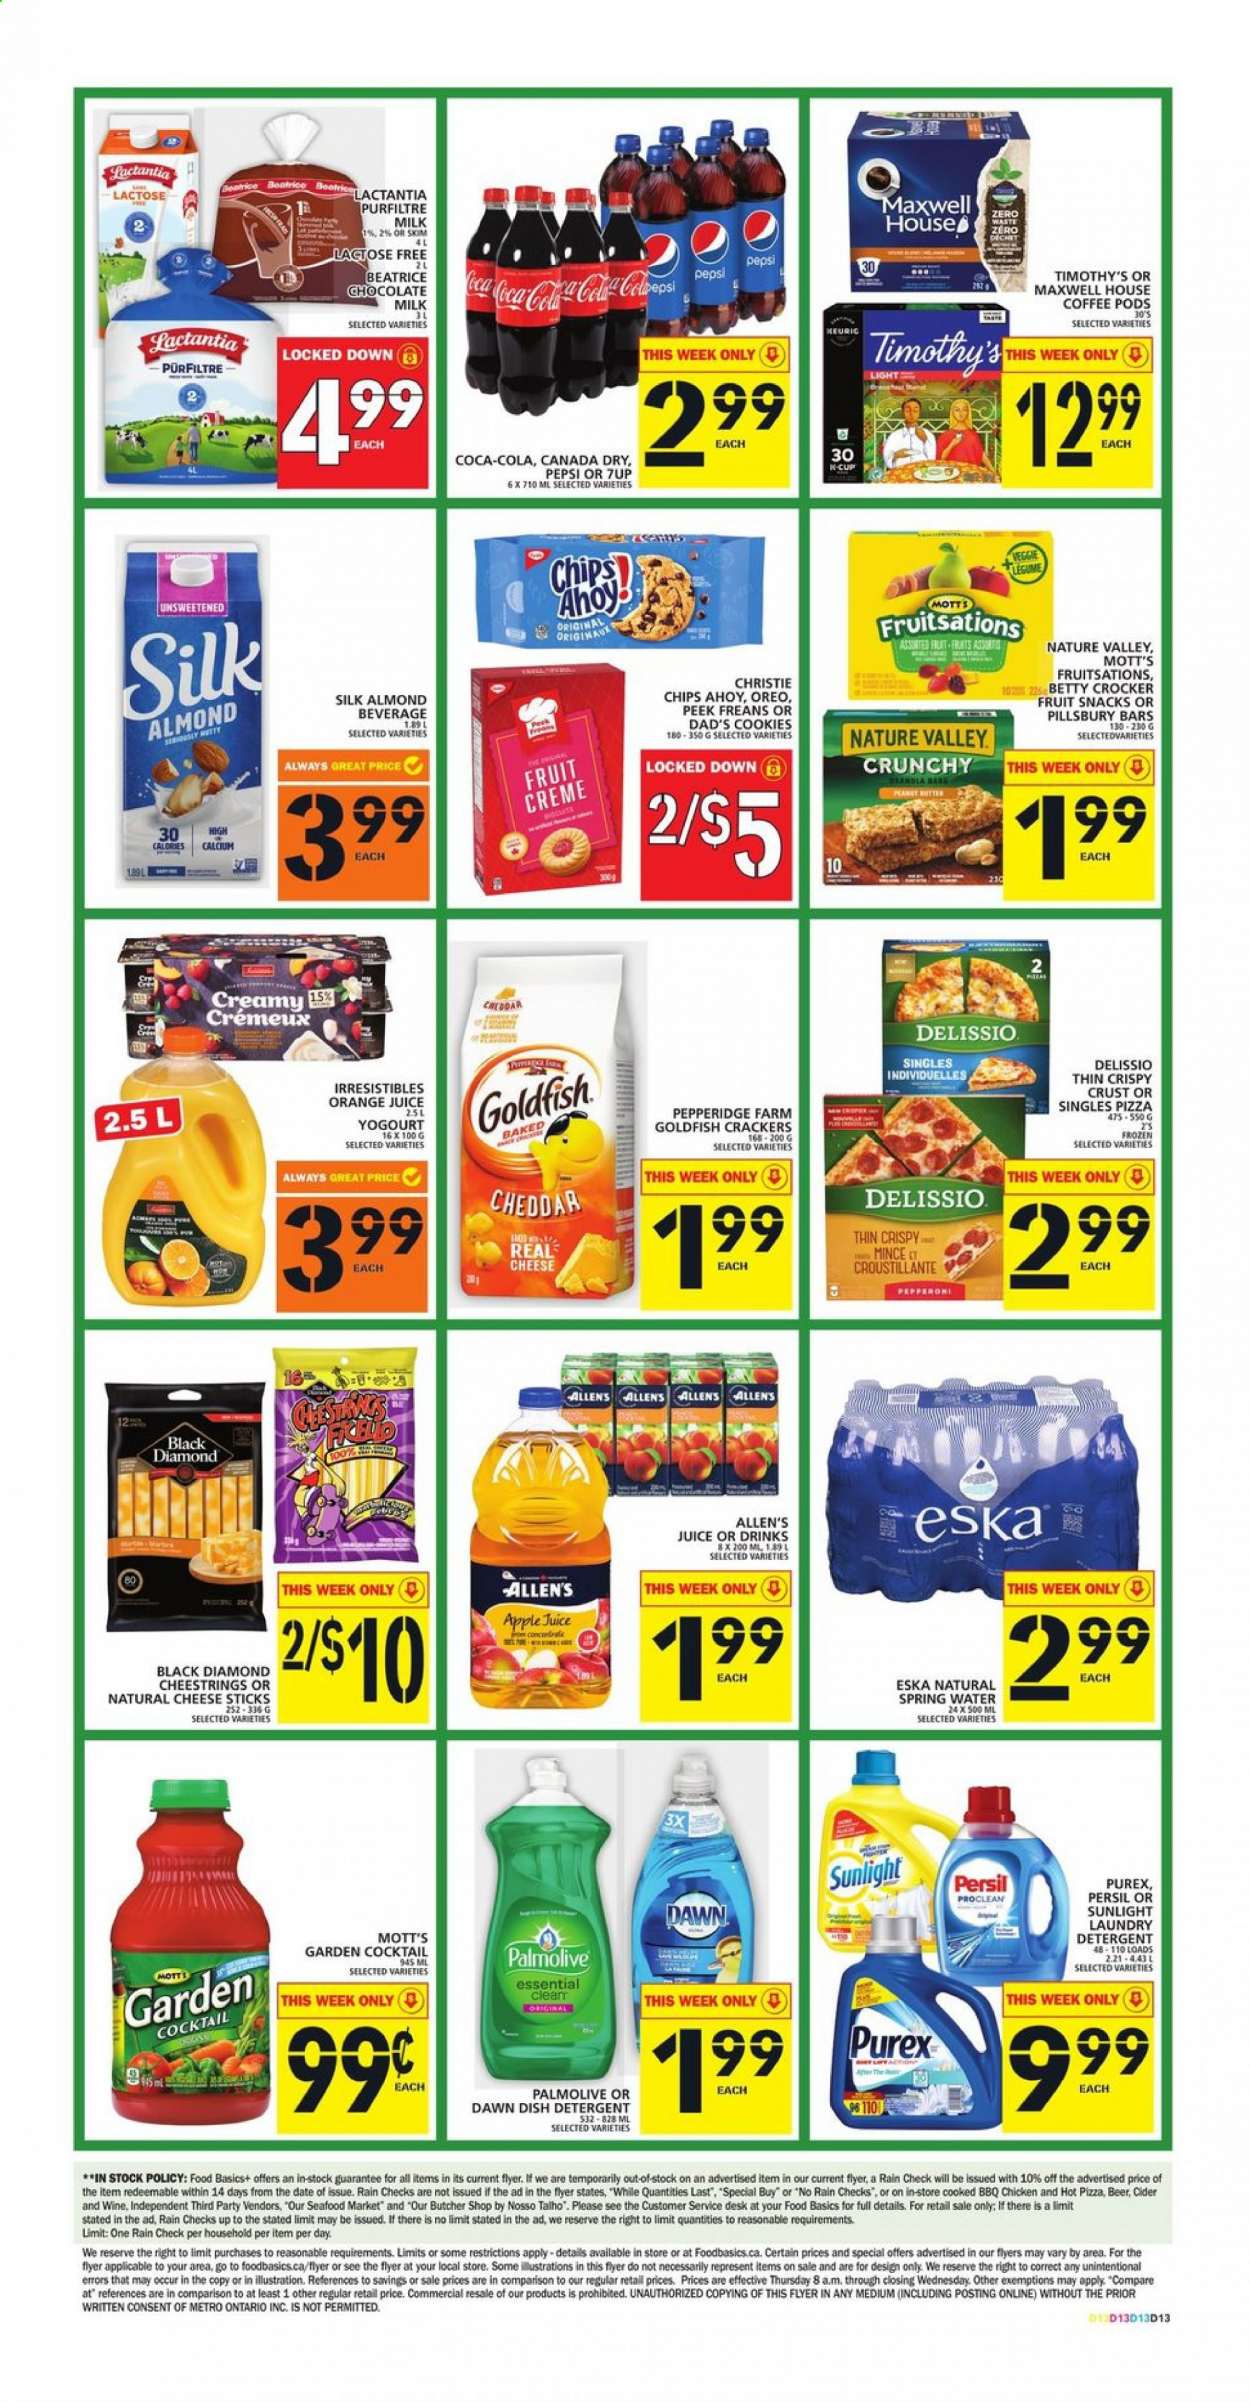 thumbnail - Food Basics Flyer - July 08, 2021 - July 14, 2021 - Sales products - Mott's, seafood, pizza, Pillsbury, string cheese, Oreo, milk, cheese sticks, cookies, milk chocolate, chocolate, crackers, fruit snack, Goldfish, Nature Valley, apple juice, Canada Dry, Coca-Cola, Pepsi, orange juice, juice, 7UP, spring water, Maxwell House, coffee pods, wine, cider, beer, Persil, laundry detergent, Sunlight, Purex, Palmolive. Page 5.